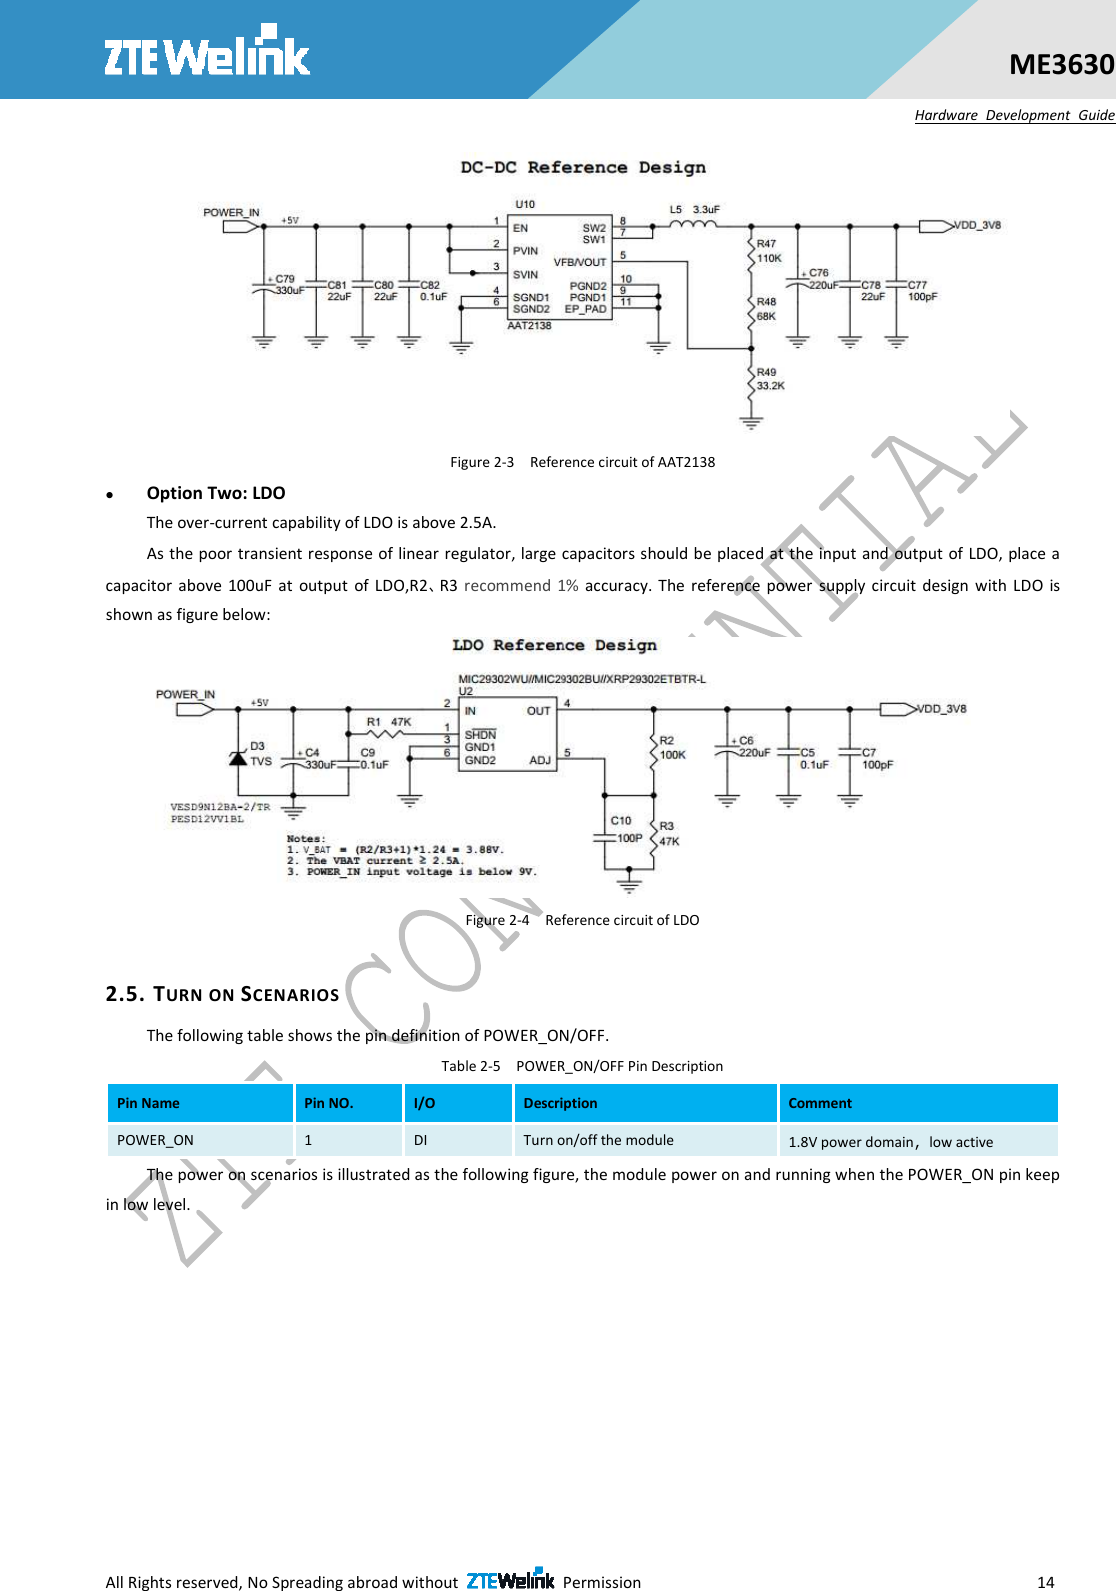  All Rights reserved, No Spreading abroad without    Permission                        14 ME3630 Hardware  Development  Guide  Figure 2-3    Reference circuit of AAT2138  Option Two: LDO   The over-current capability of LDO is above 2.5A.   As the poor transient response of linear regulator, large capacitors should be placed at the input and output of LDO, place a capacitor  above  100uF  at  output  of  LDO,R2、R3  recommend  1%  accuracy.  The  reference power  supply  circuit  design  with  LDO  is shown as figure below:  Figure 2-4    Reference circuit of LDO  2.5. TURN ON SCENARIOS The following table shows the pin definition of POWER_ON/OFF. Table 2-5    POWER_ON/OFF Pin Description Pin Name  Pin NO.  I/O  Description  Comment POWER_ON  1  DI  Turn on/off the module  1.8V power domain，low active The power on scenarios is illustrated as the following figure, the module power on and running when the POWER_ON pin keep in low level. 